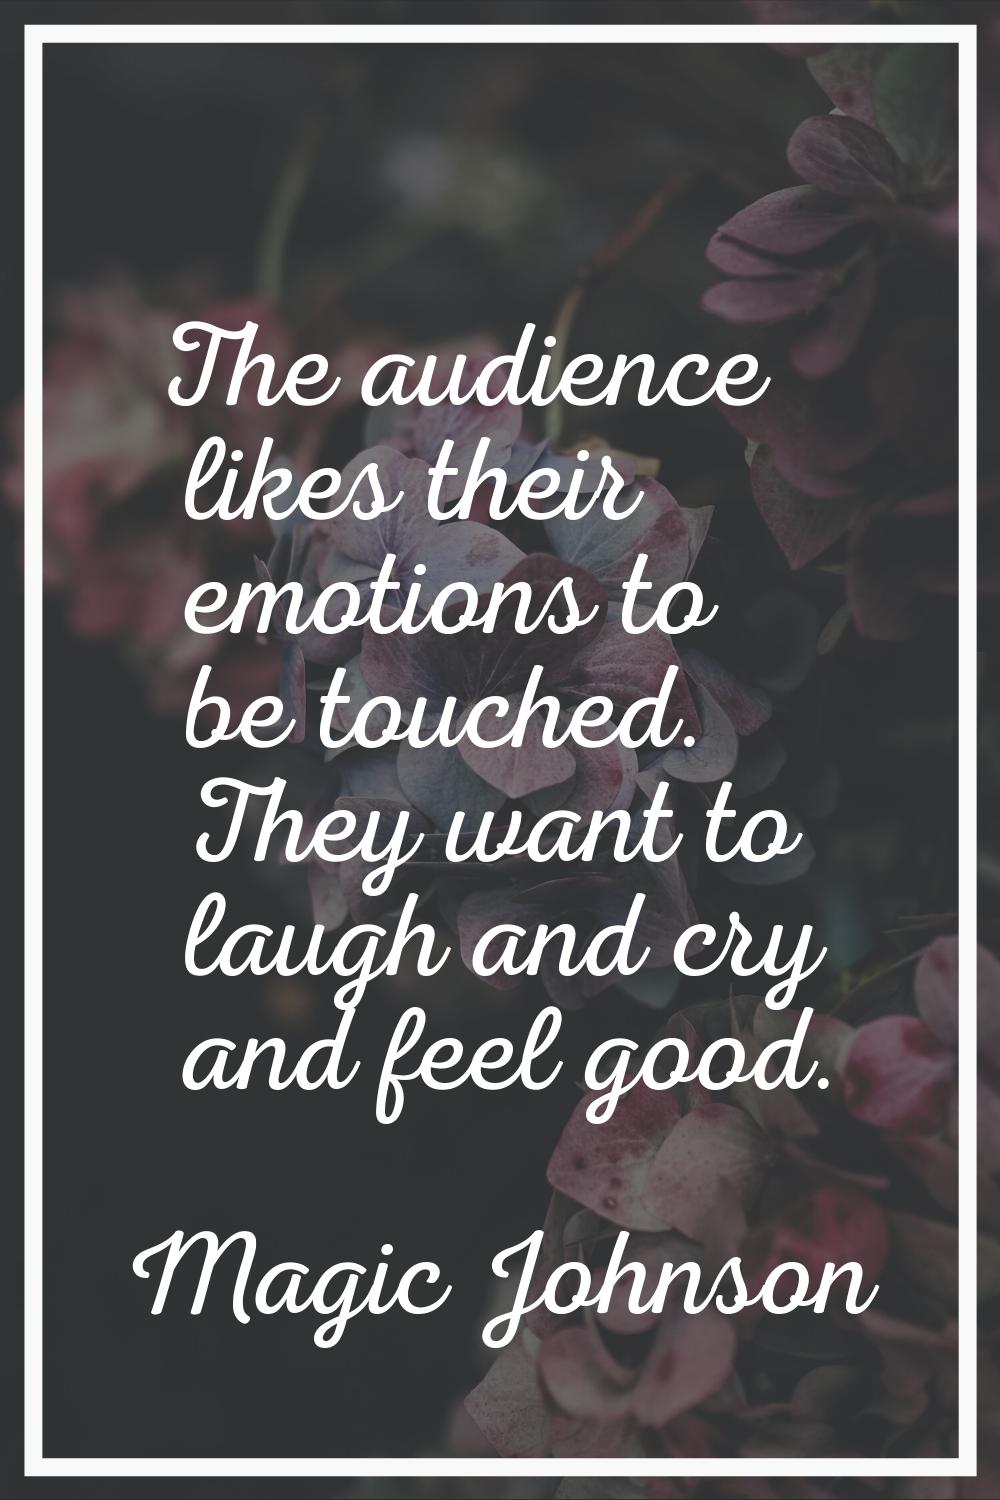 The audience likes their emotions to be touched. They want to laugh and cry and feel good.